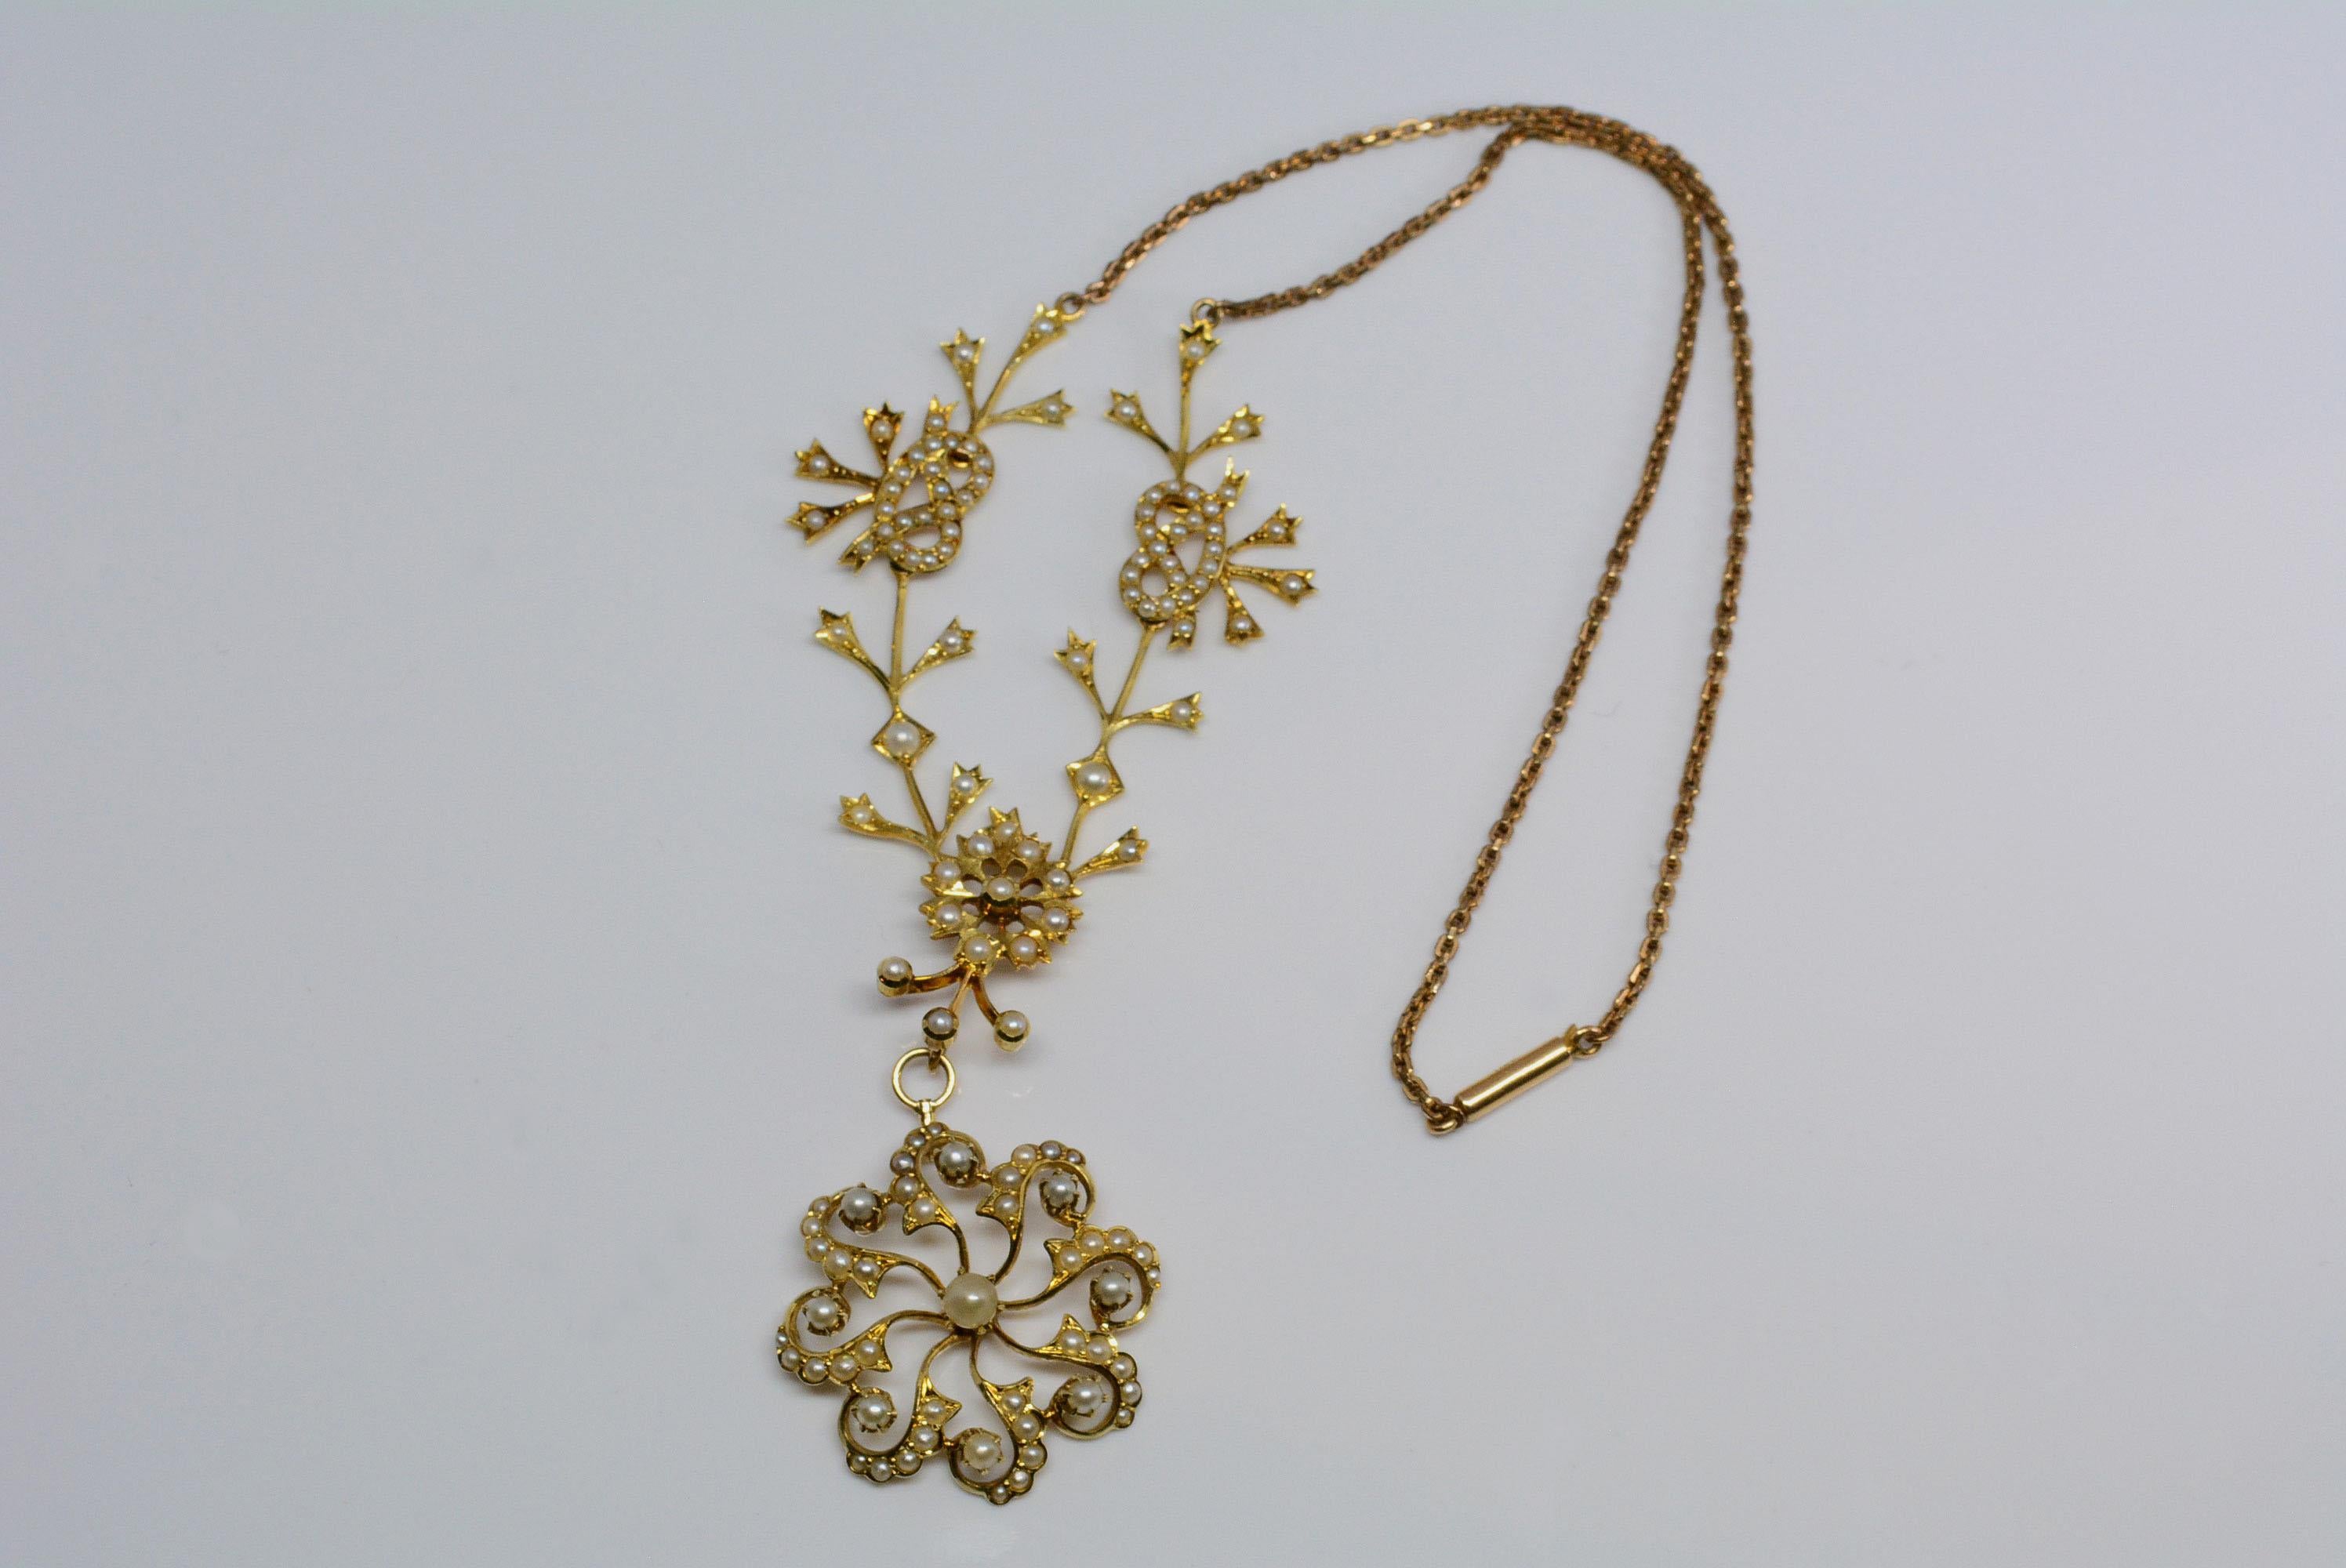 This necklace is made from 14 karat yellow gold and has seed pearls set throughout the piece with love knot and bow motifs. 
These motifs symbolized endless love in the victorian era, along with the large centrepiece that has a floral motif which is